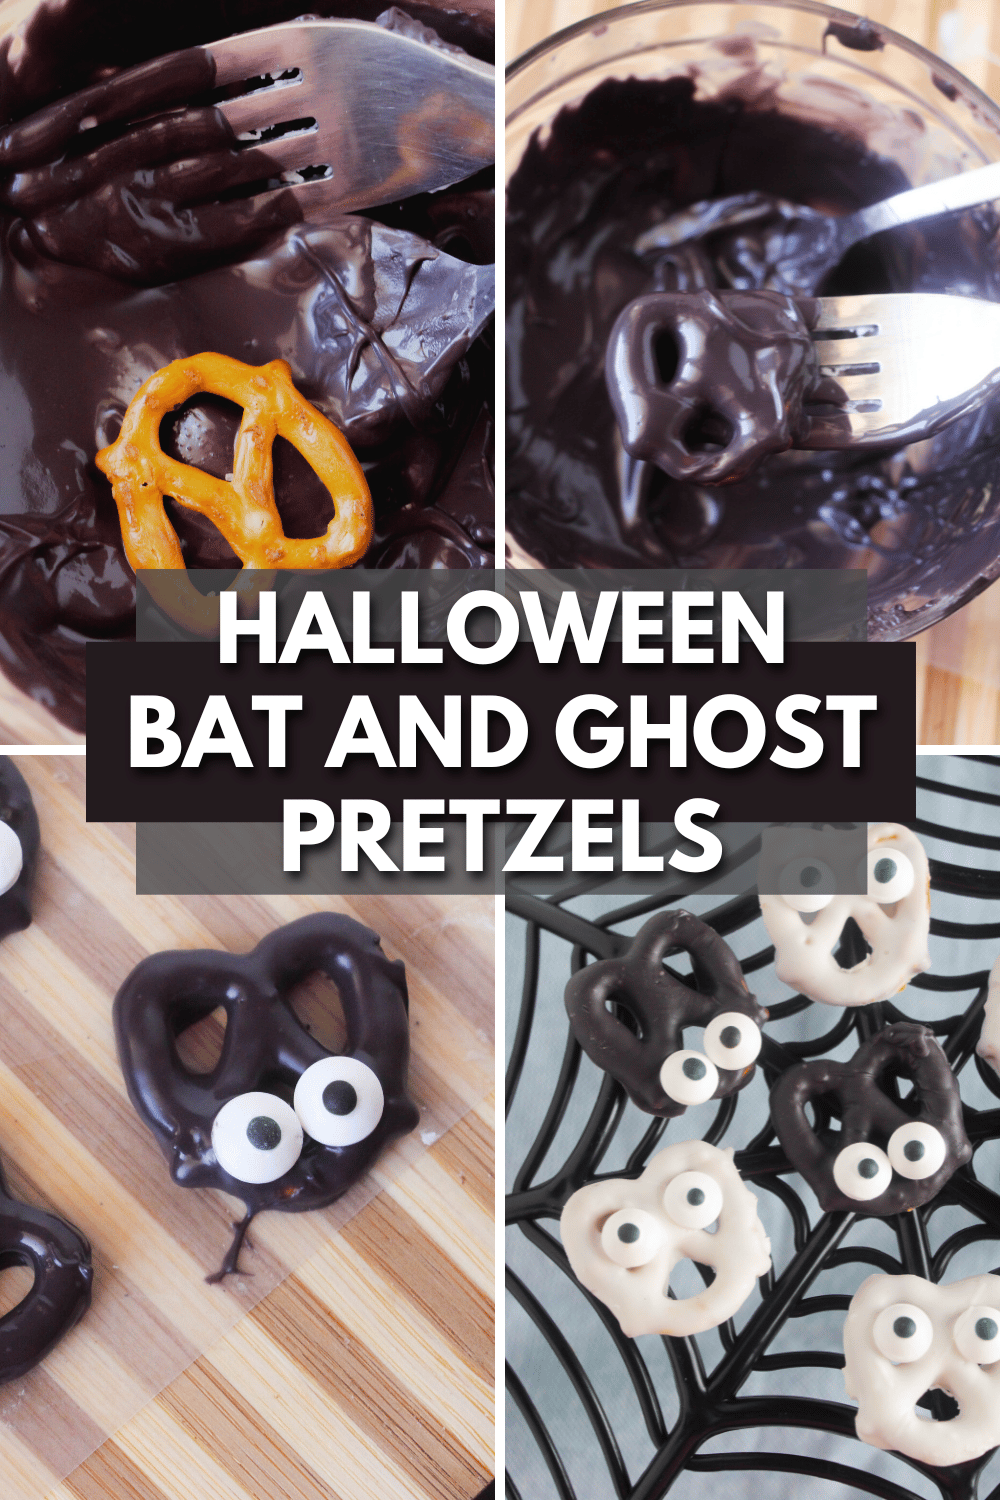 These Halloween Bat and Ghost Pretzels are so easy and fun to make! This is a tasty snack that your kids will love. #ghostpretzels #halloween #halloweensnack #batpretzels via @wondermomwannab